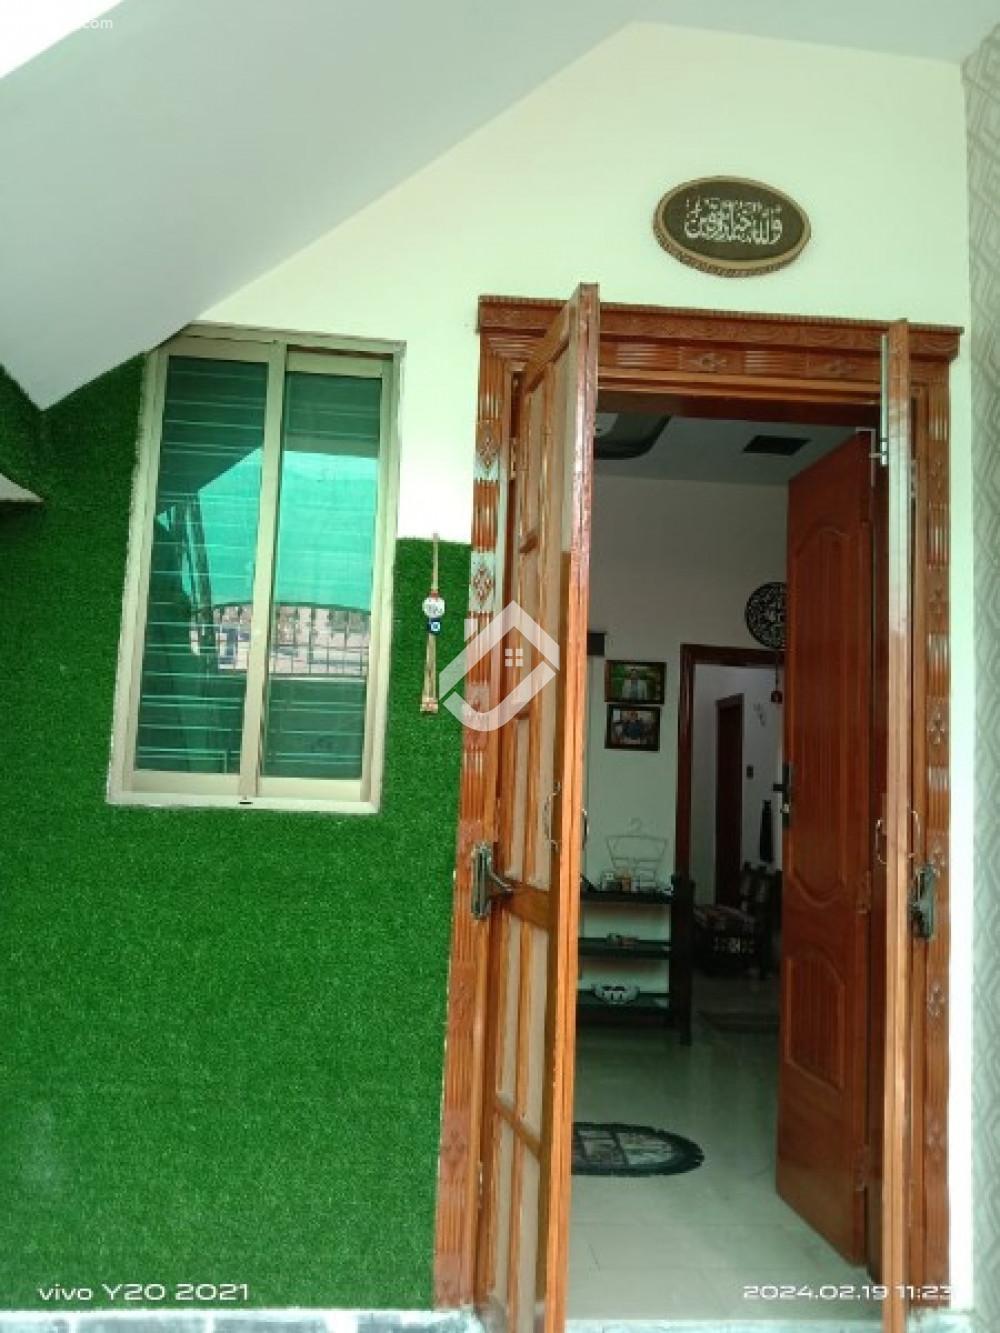 Main image 3.73 Marla Double Storey House For Sale In Farooq Colony Phase 2 Farooq colony University road 